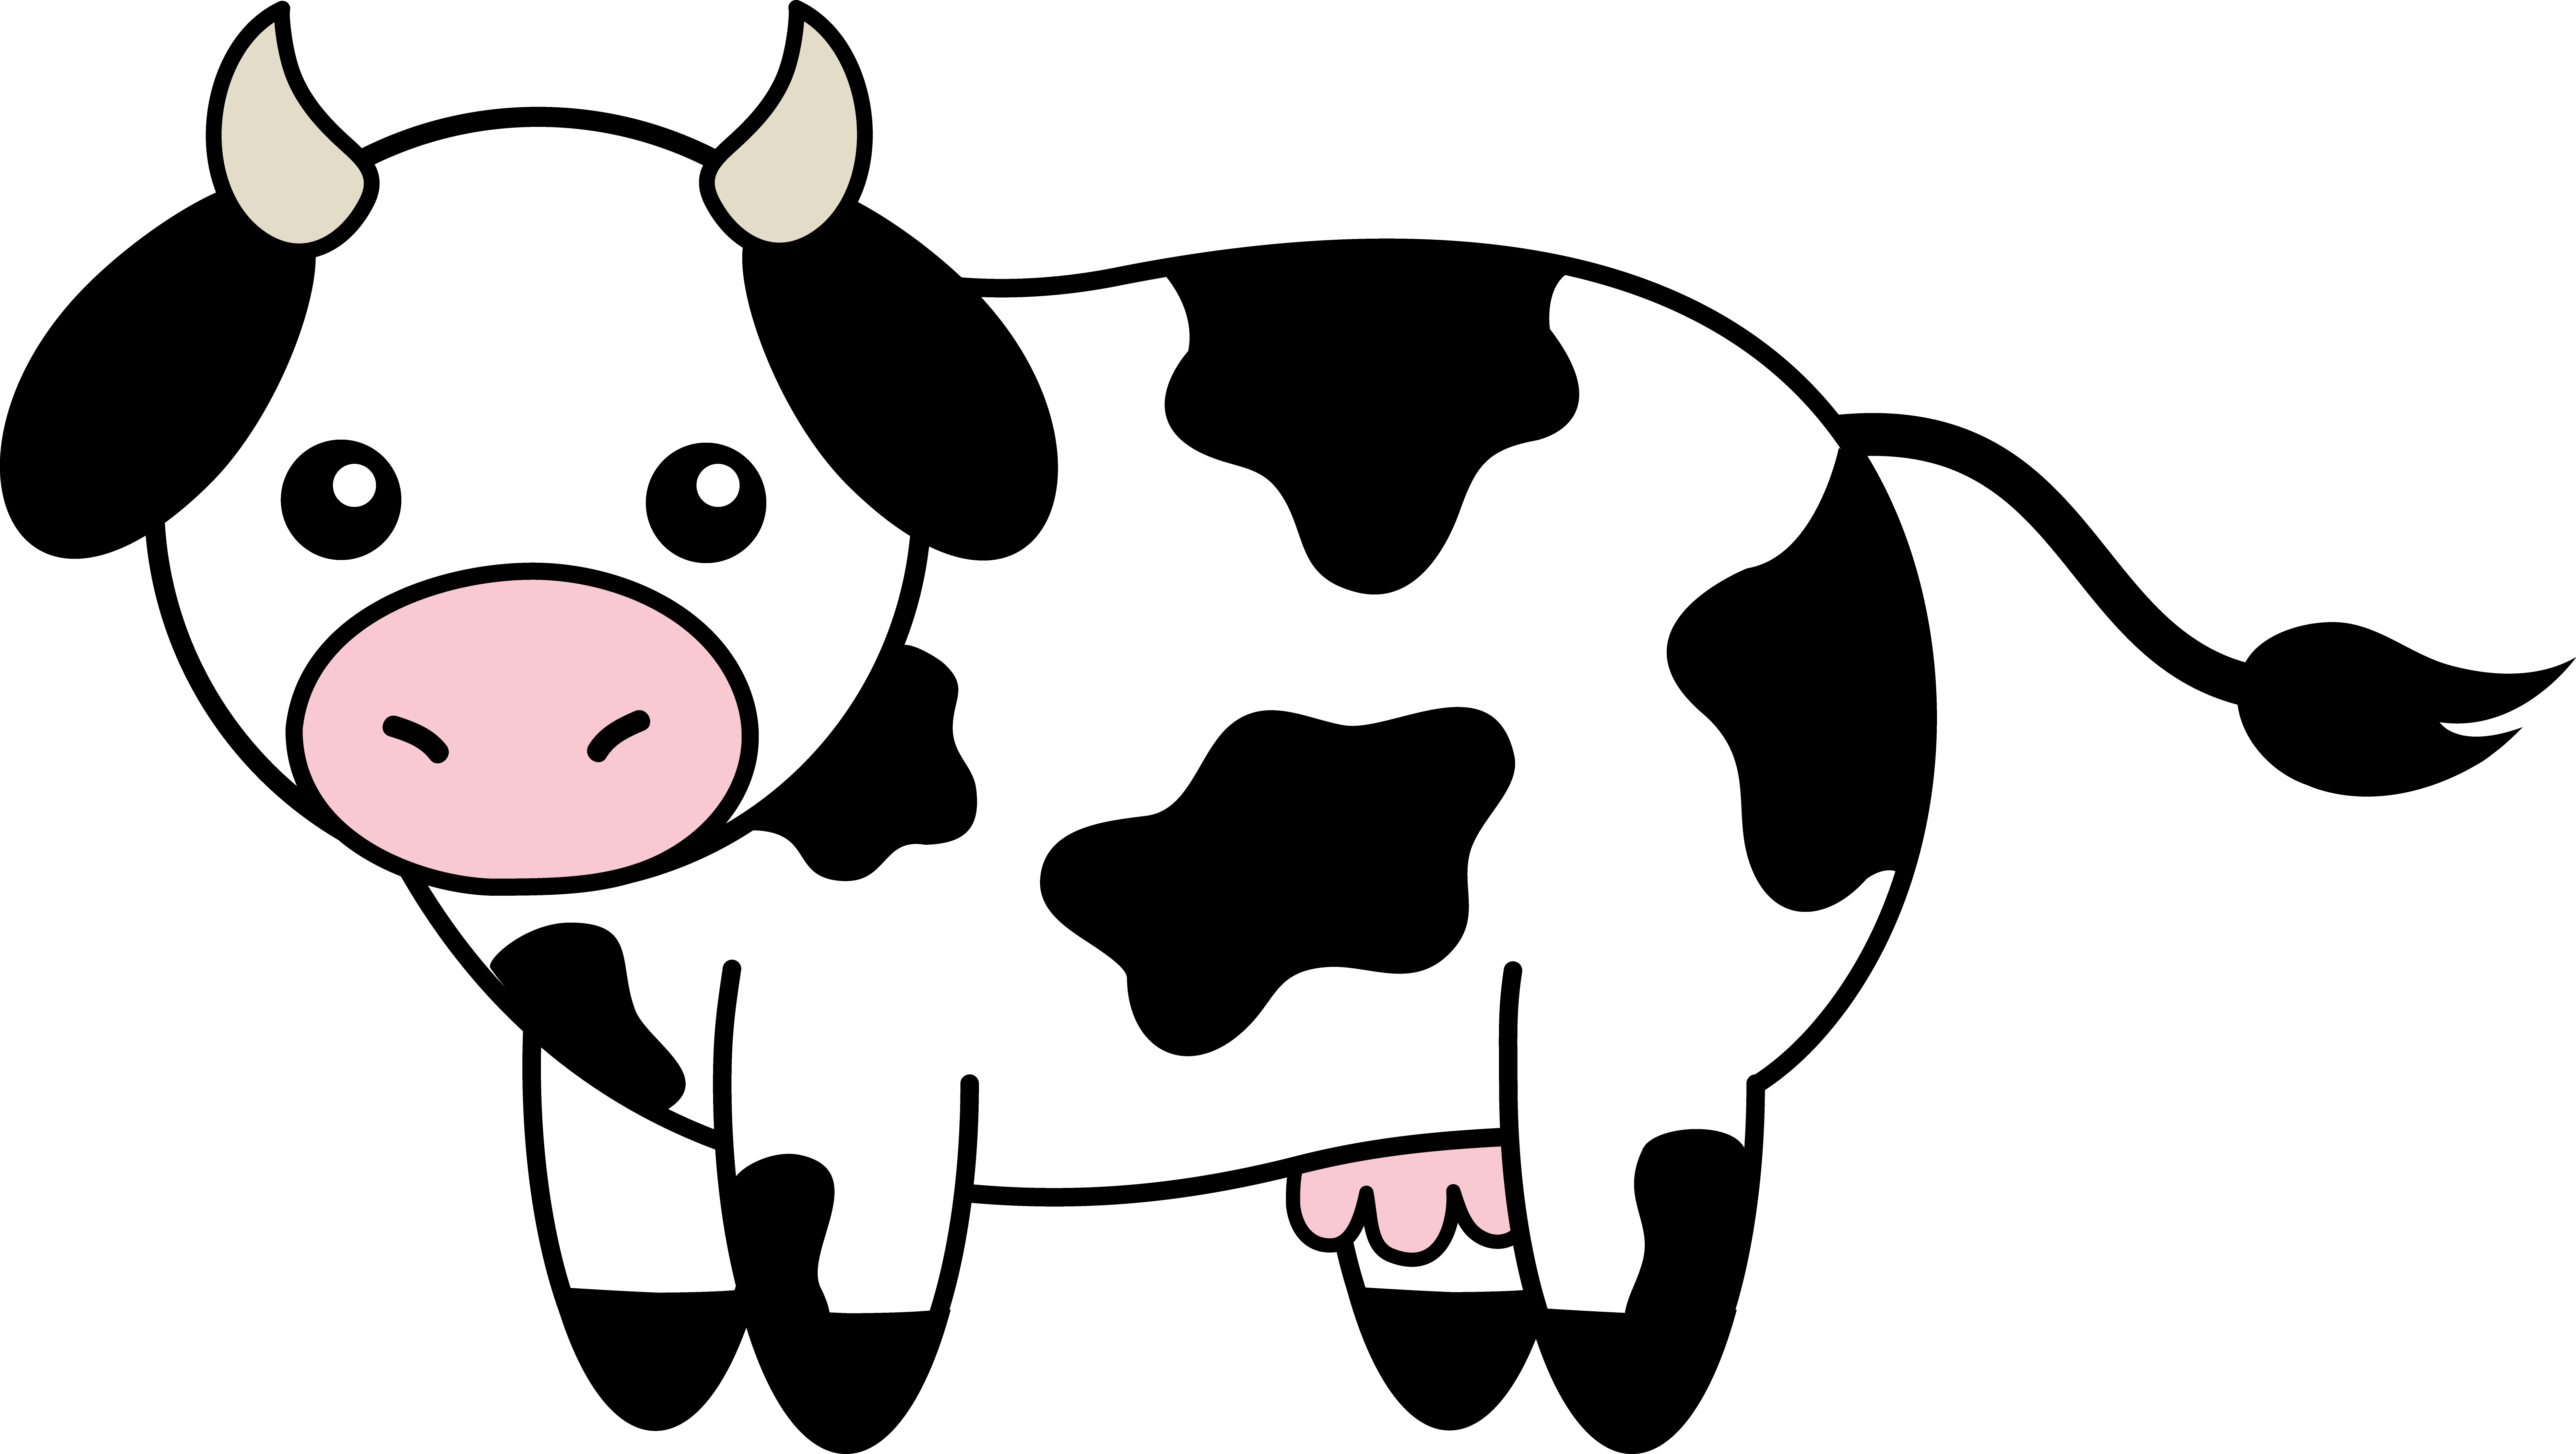 Clipart cow. Black and white panda